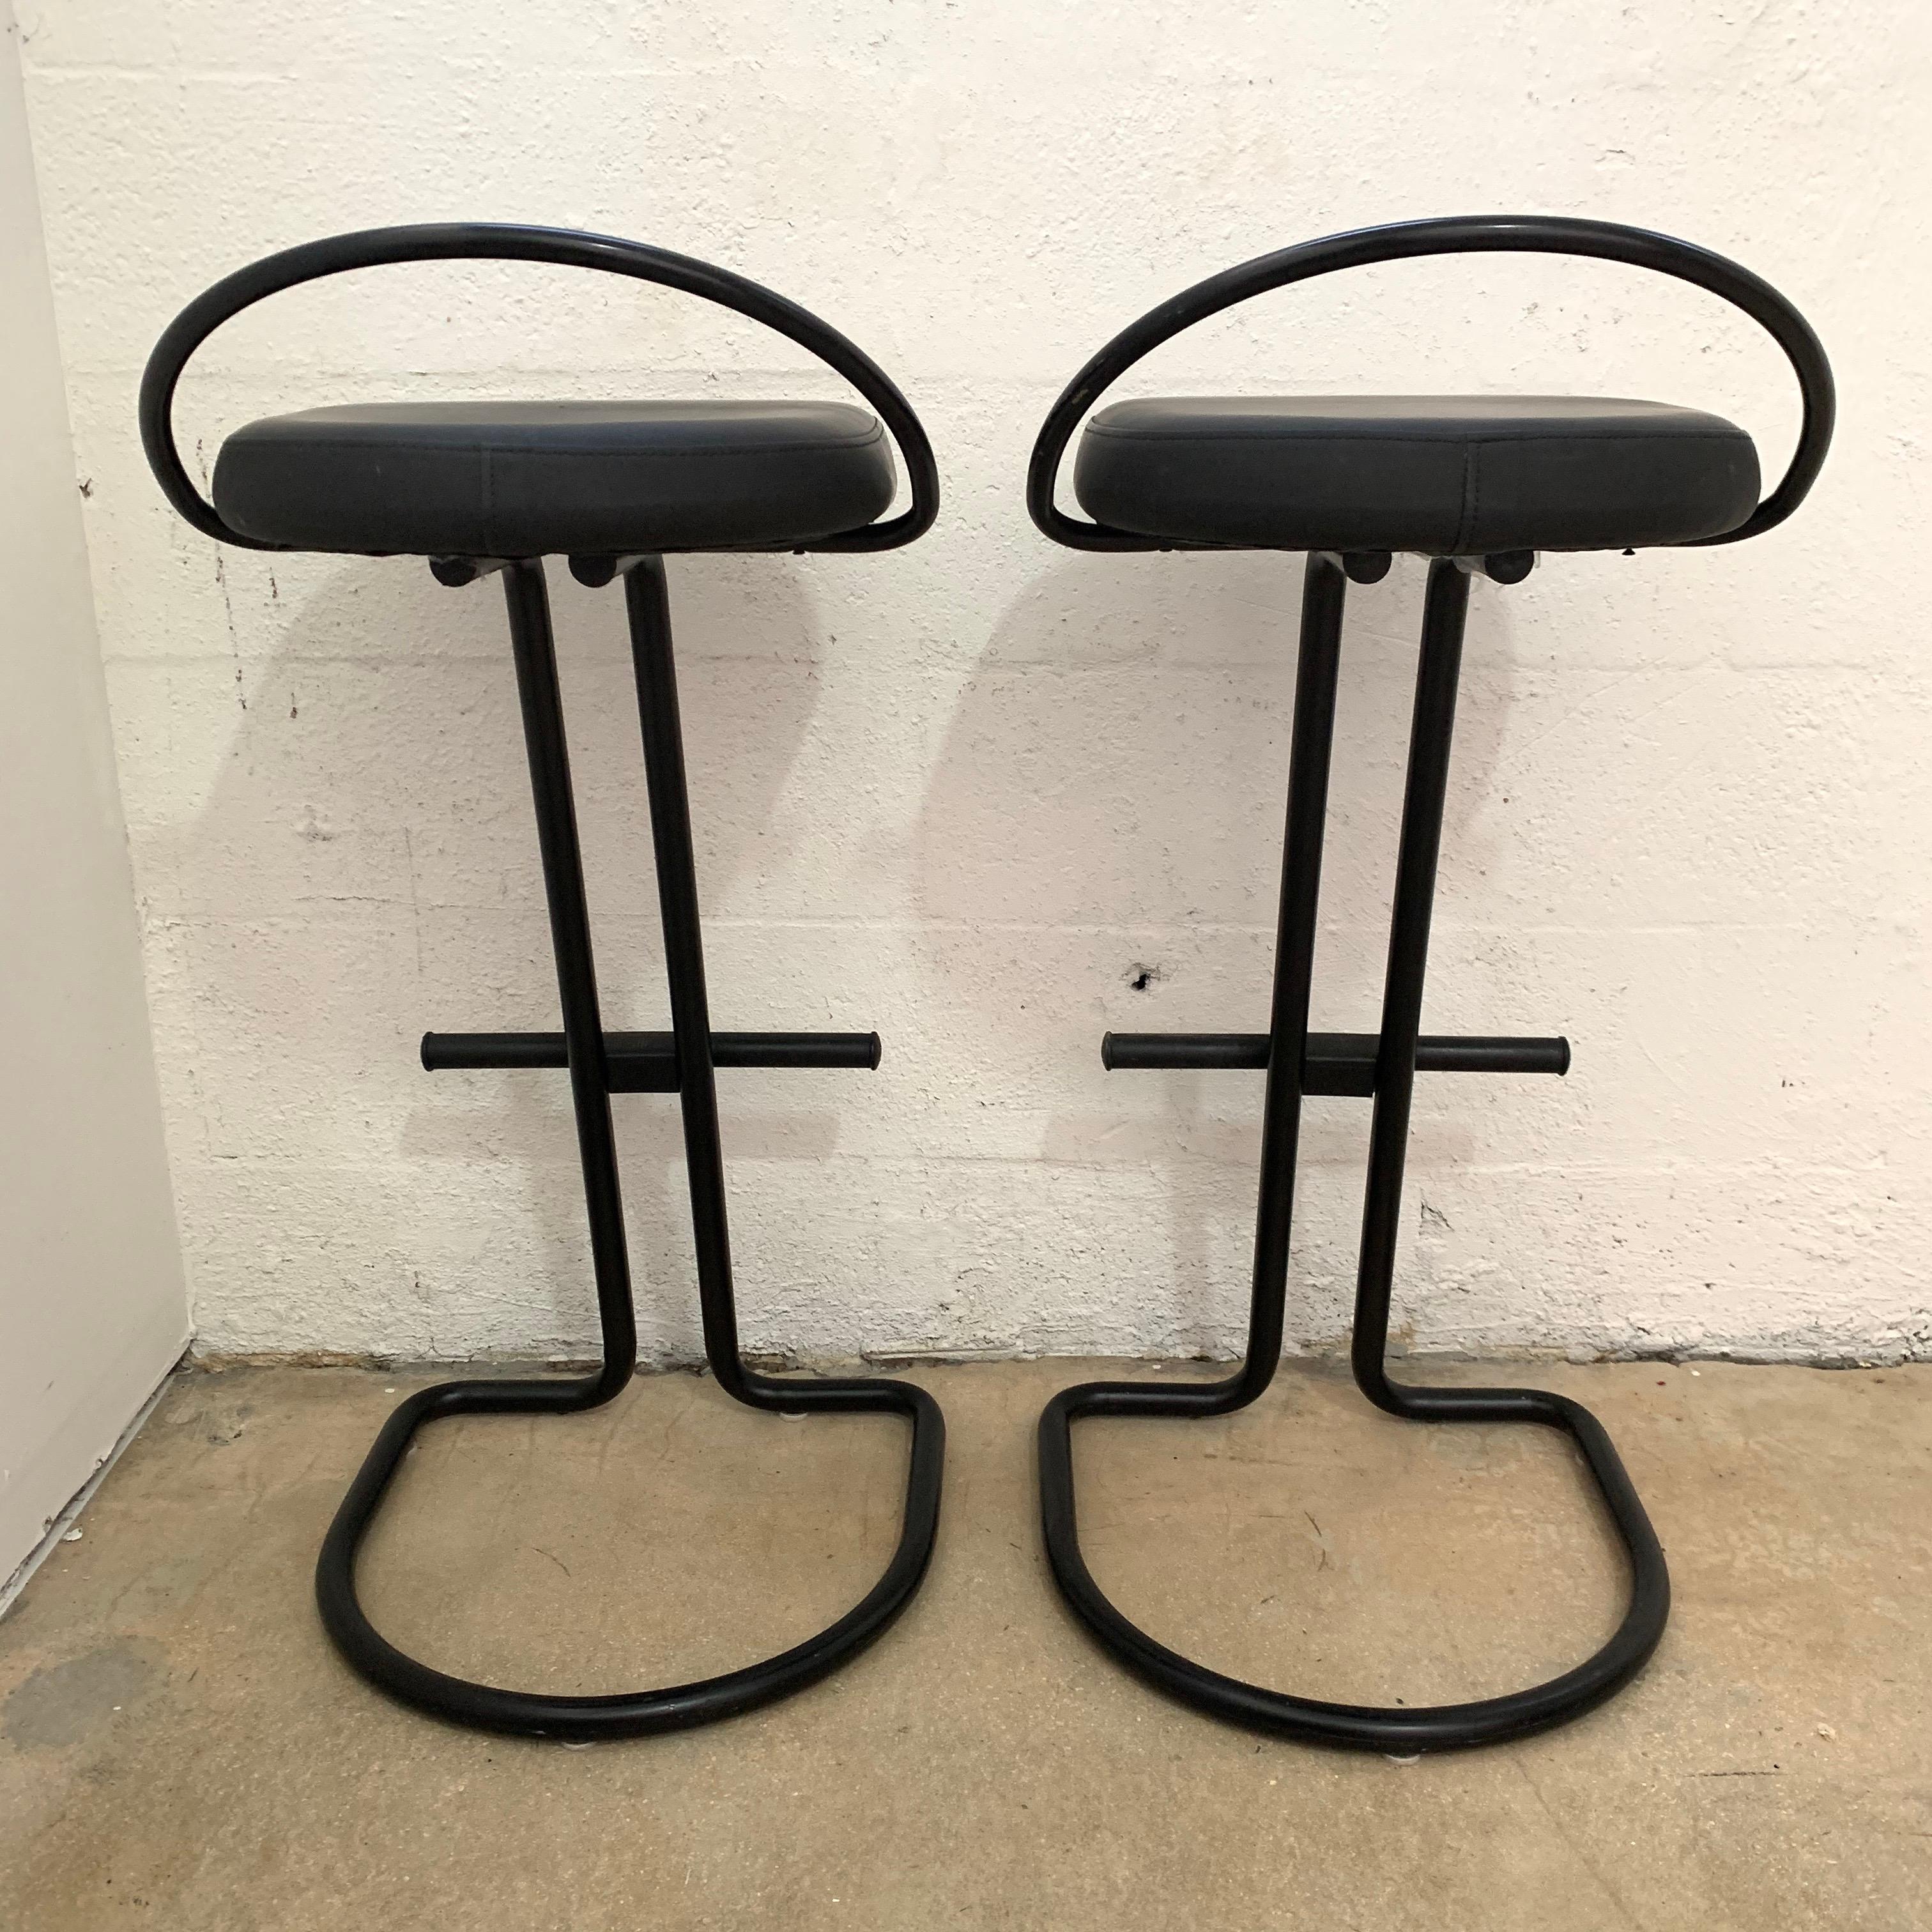 Painted Postmodern Italian Black Rubber Bar Stools, Italy, 1990s For Sale